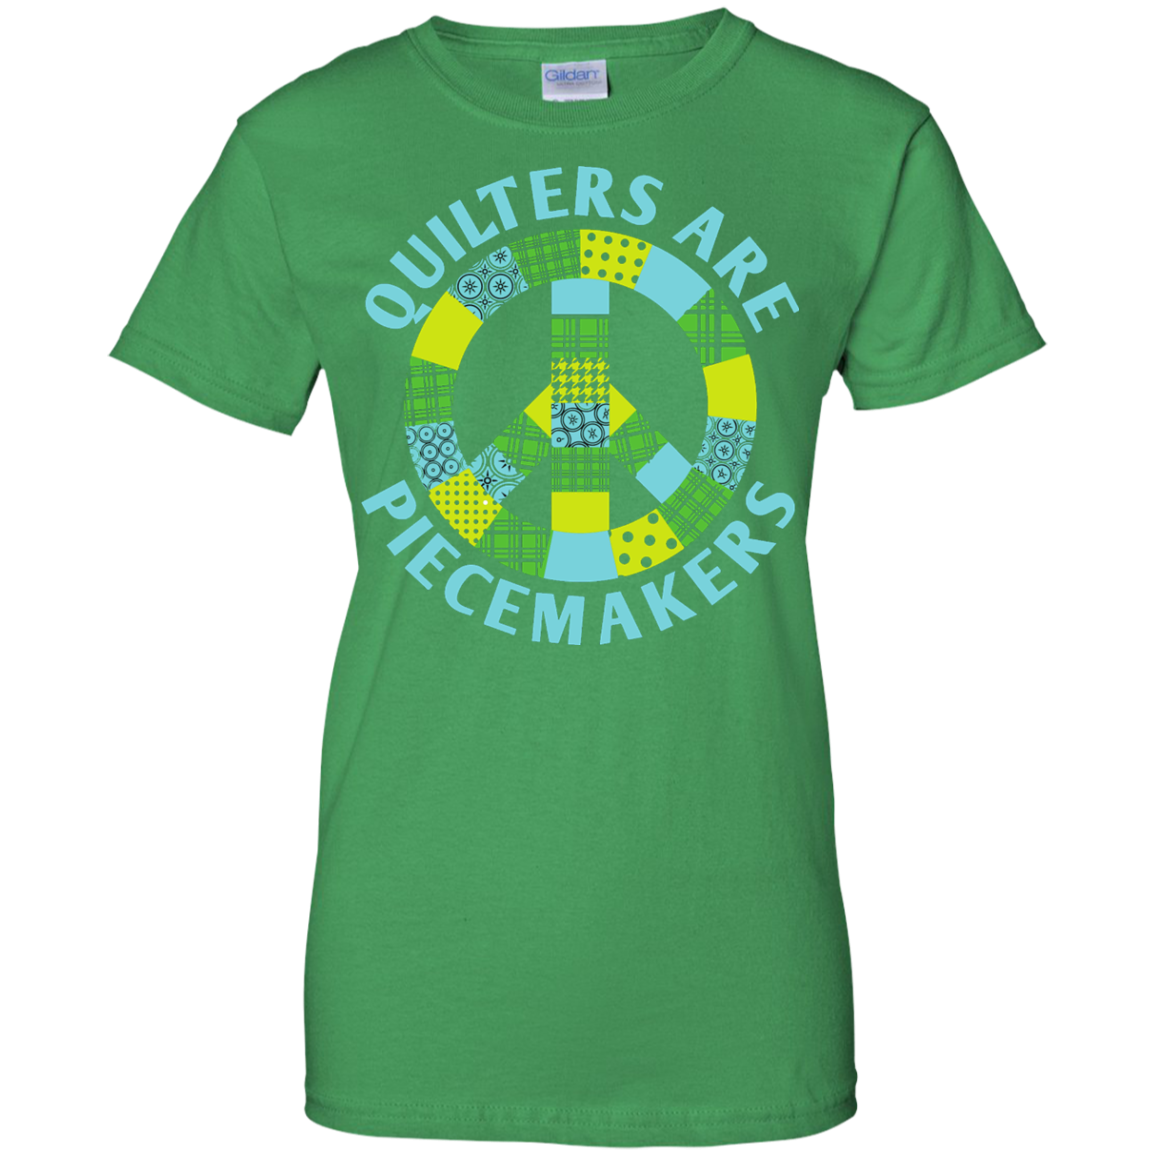 Quilters are Piecemakers Ladies Custom 100% Cotton T-Shirt - Crafter4Life - 7